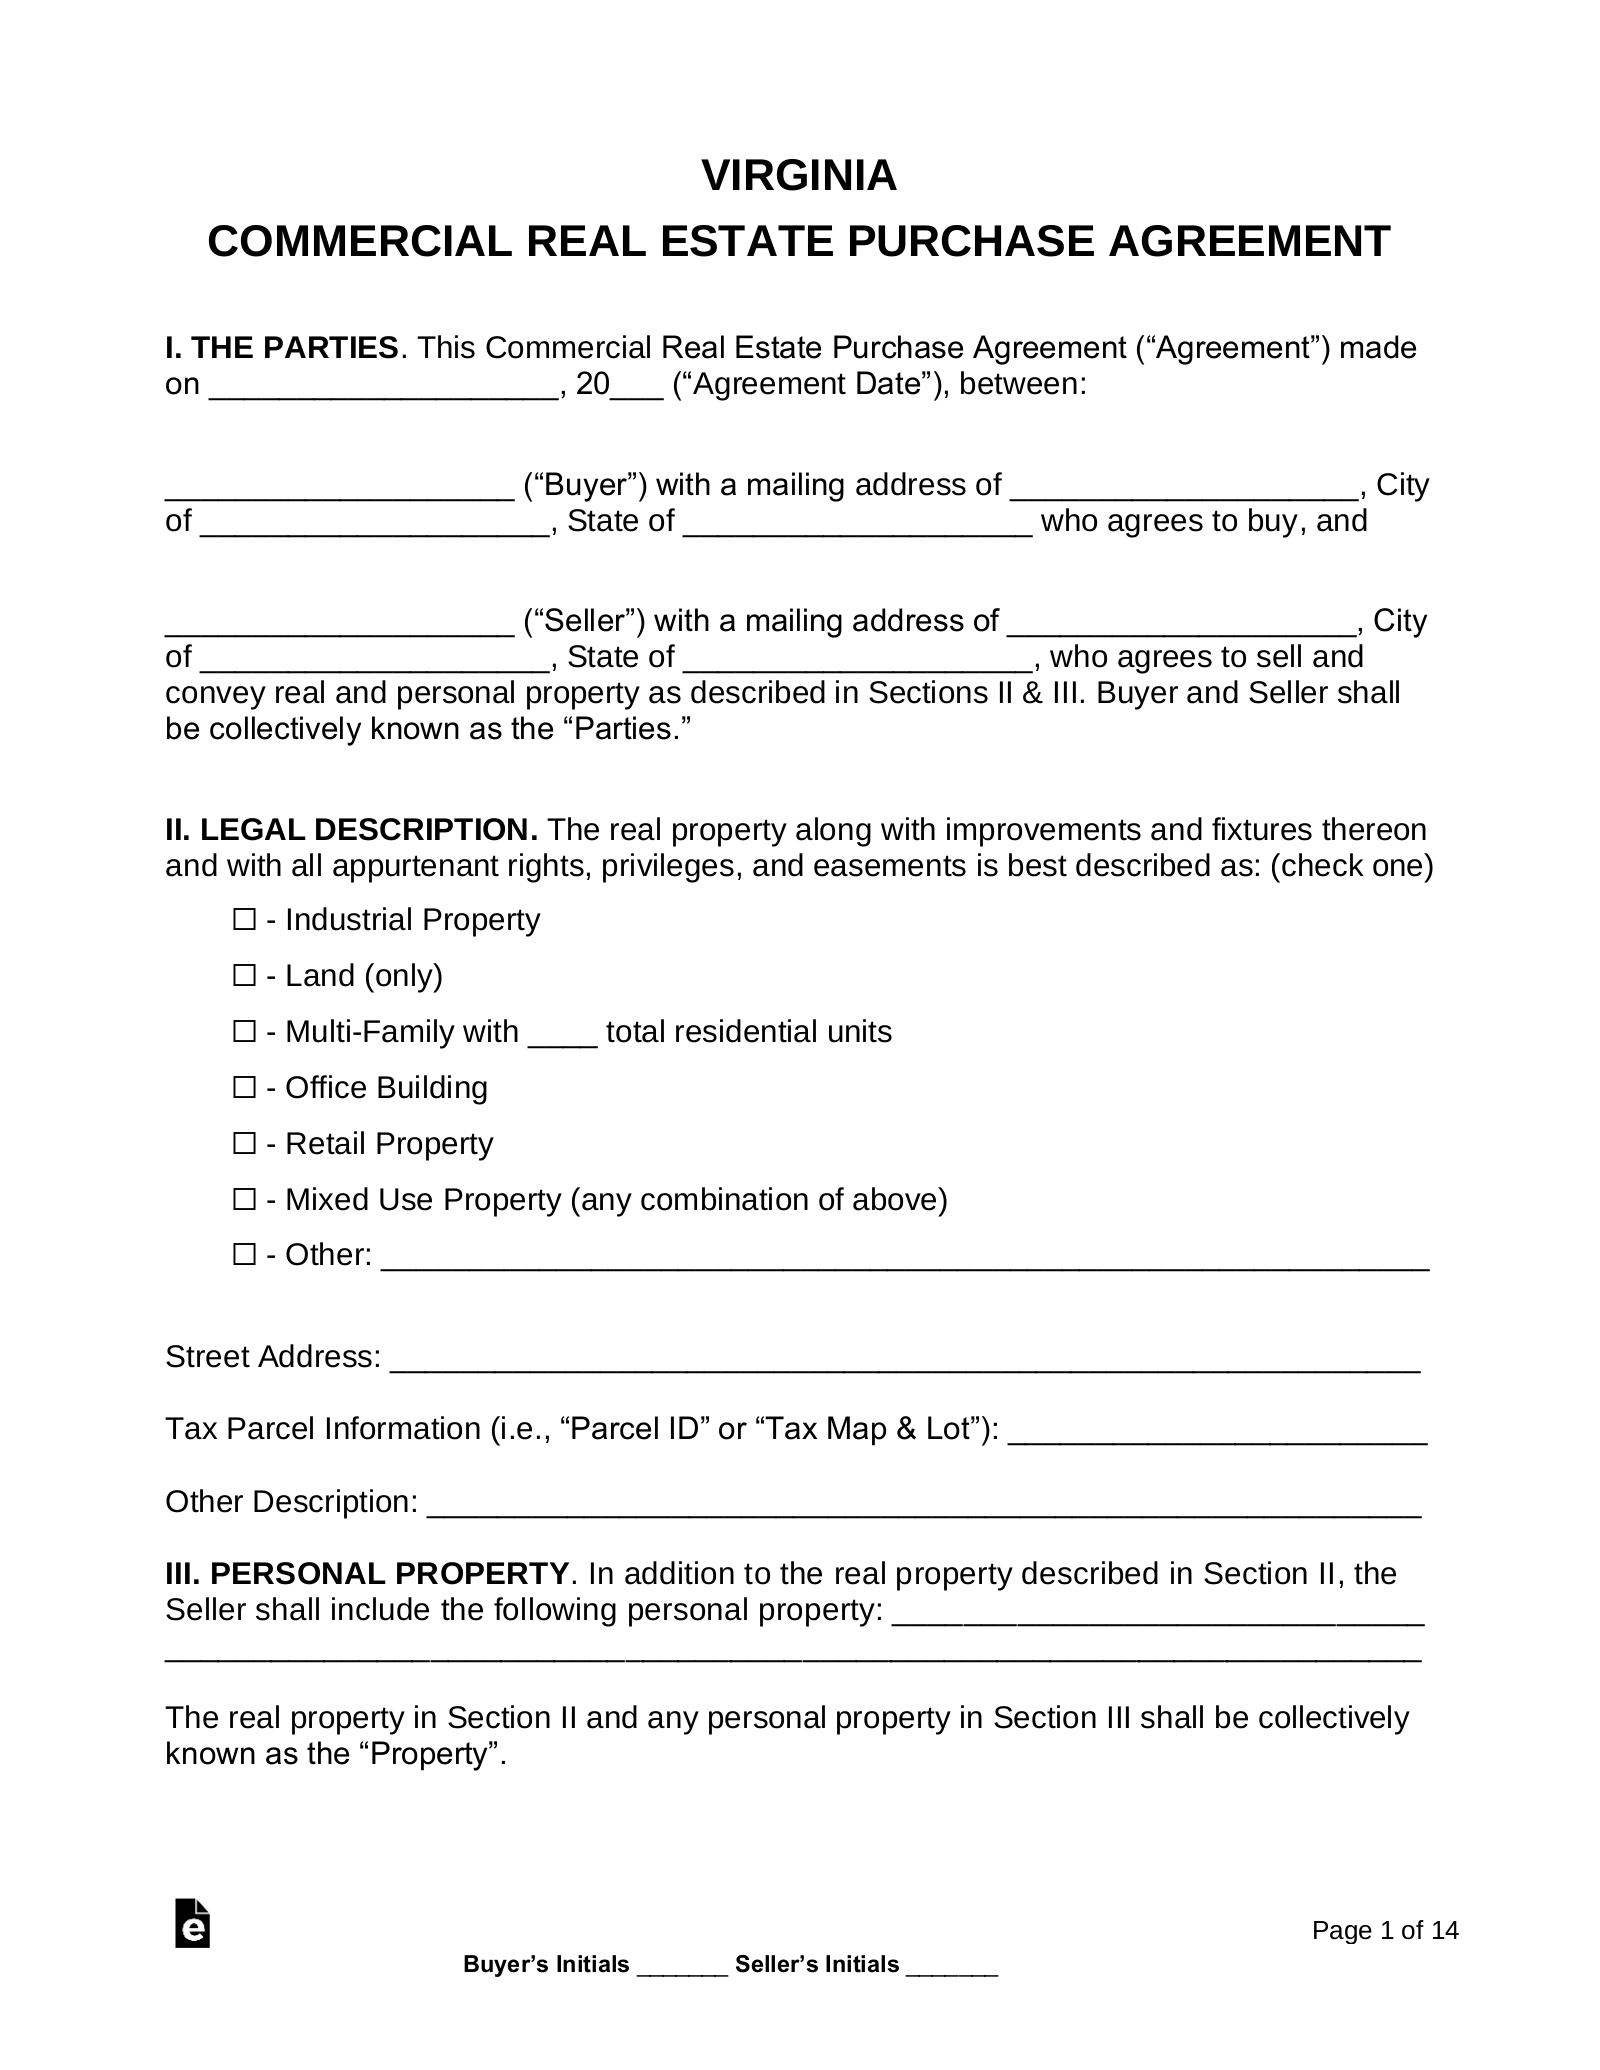 Virginia Commercial Real Estate Purchase and Sale Agreement